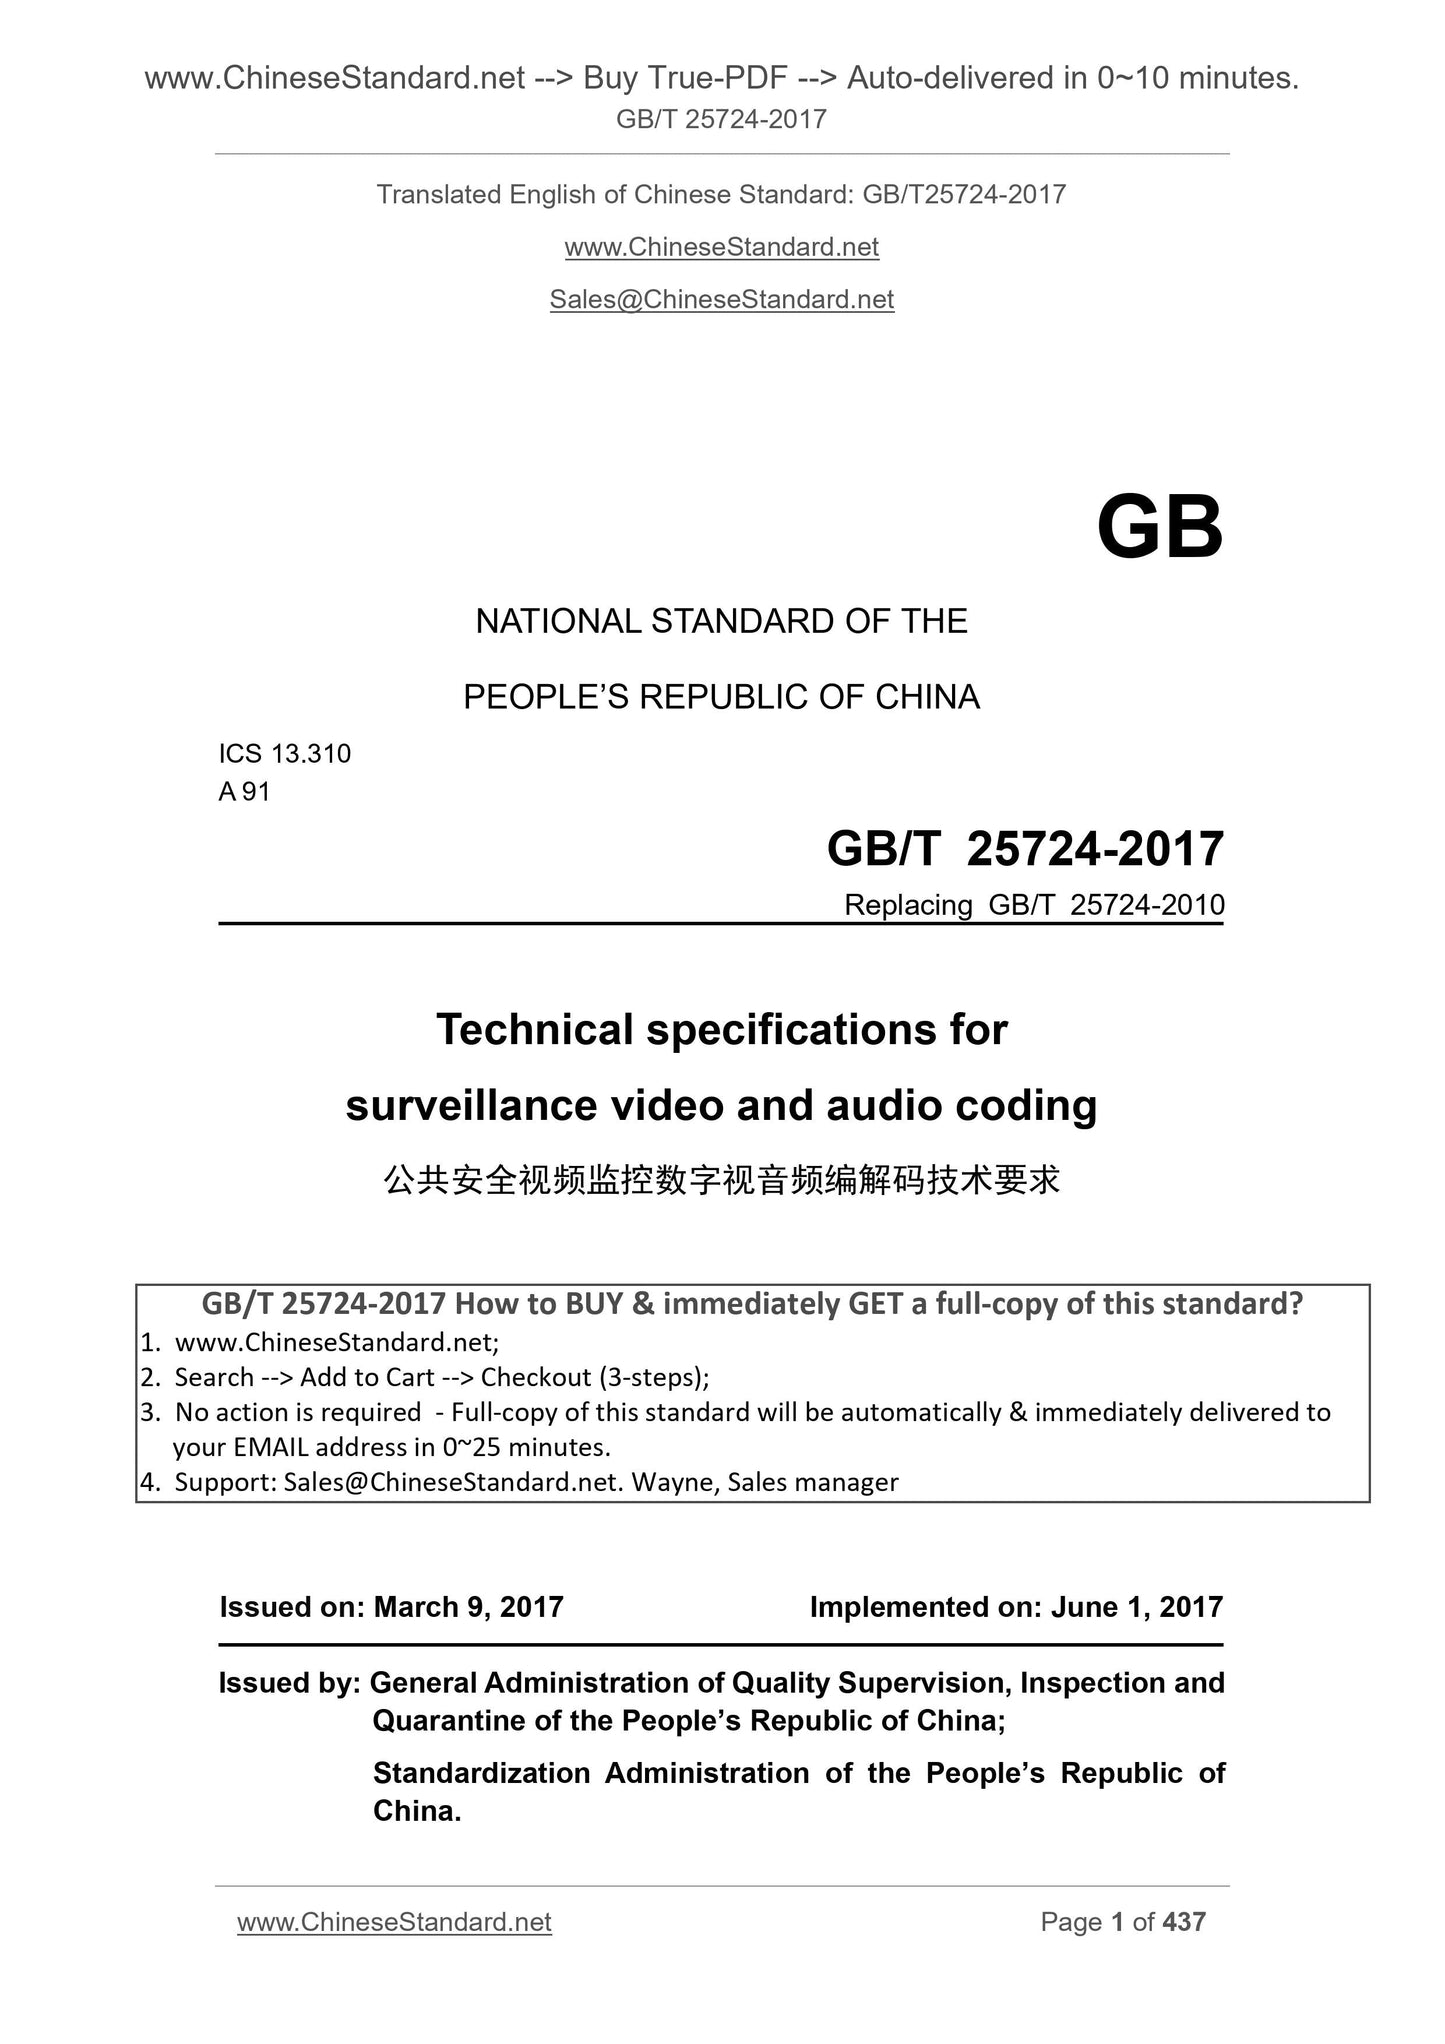 GB/T 25724-2017 Page 1